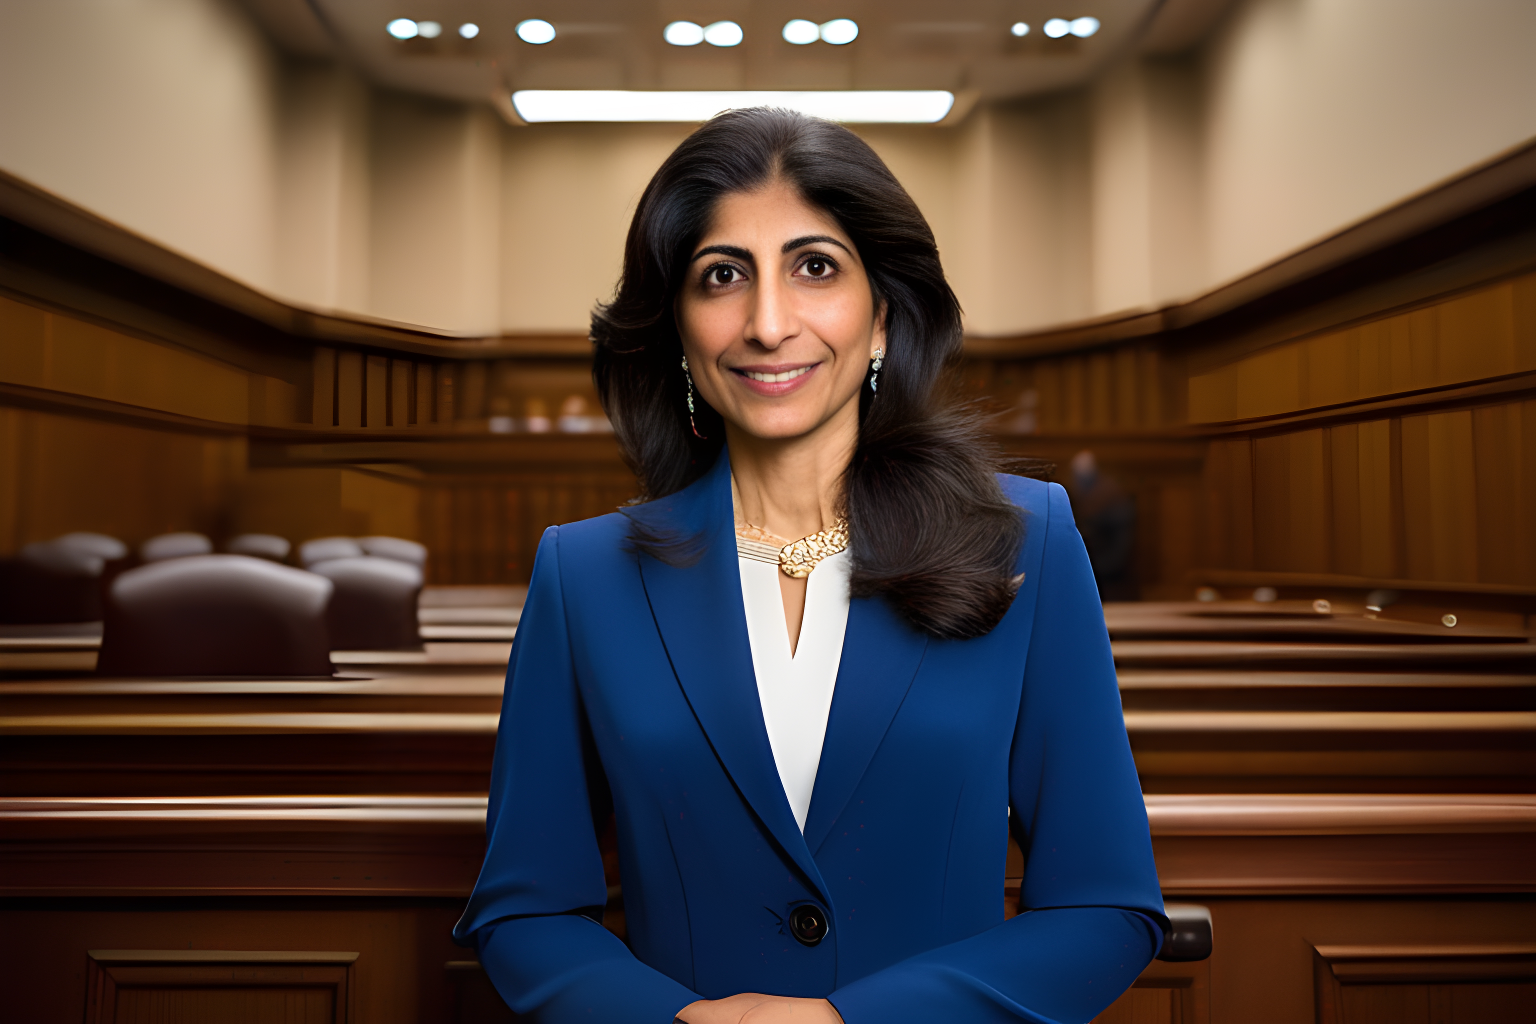 Breathtaking photograph of Lina Khan, FTC Chair, in a courtroom.award-winning, professional, highly detailed